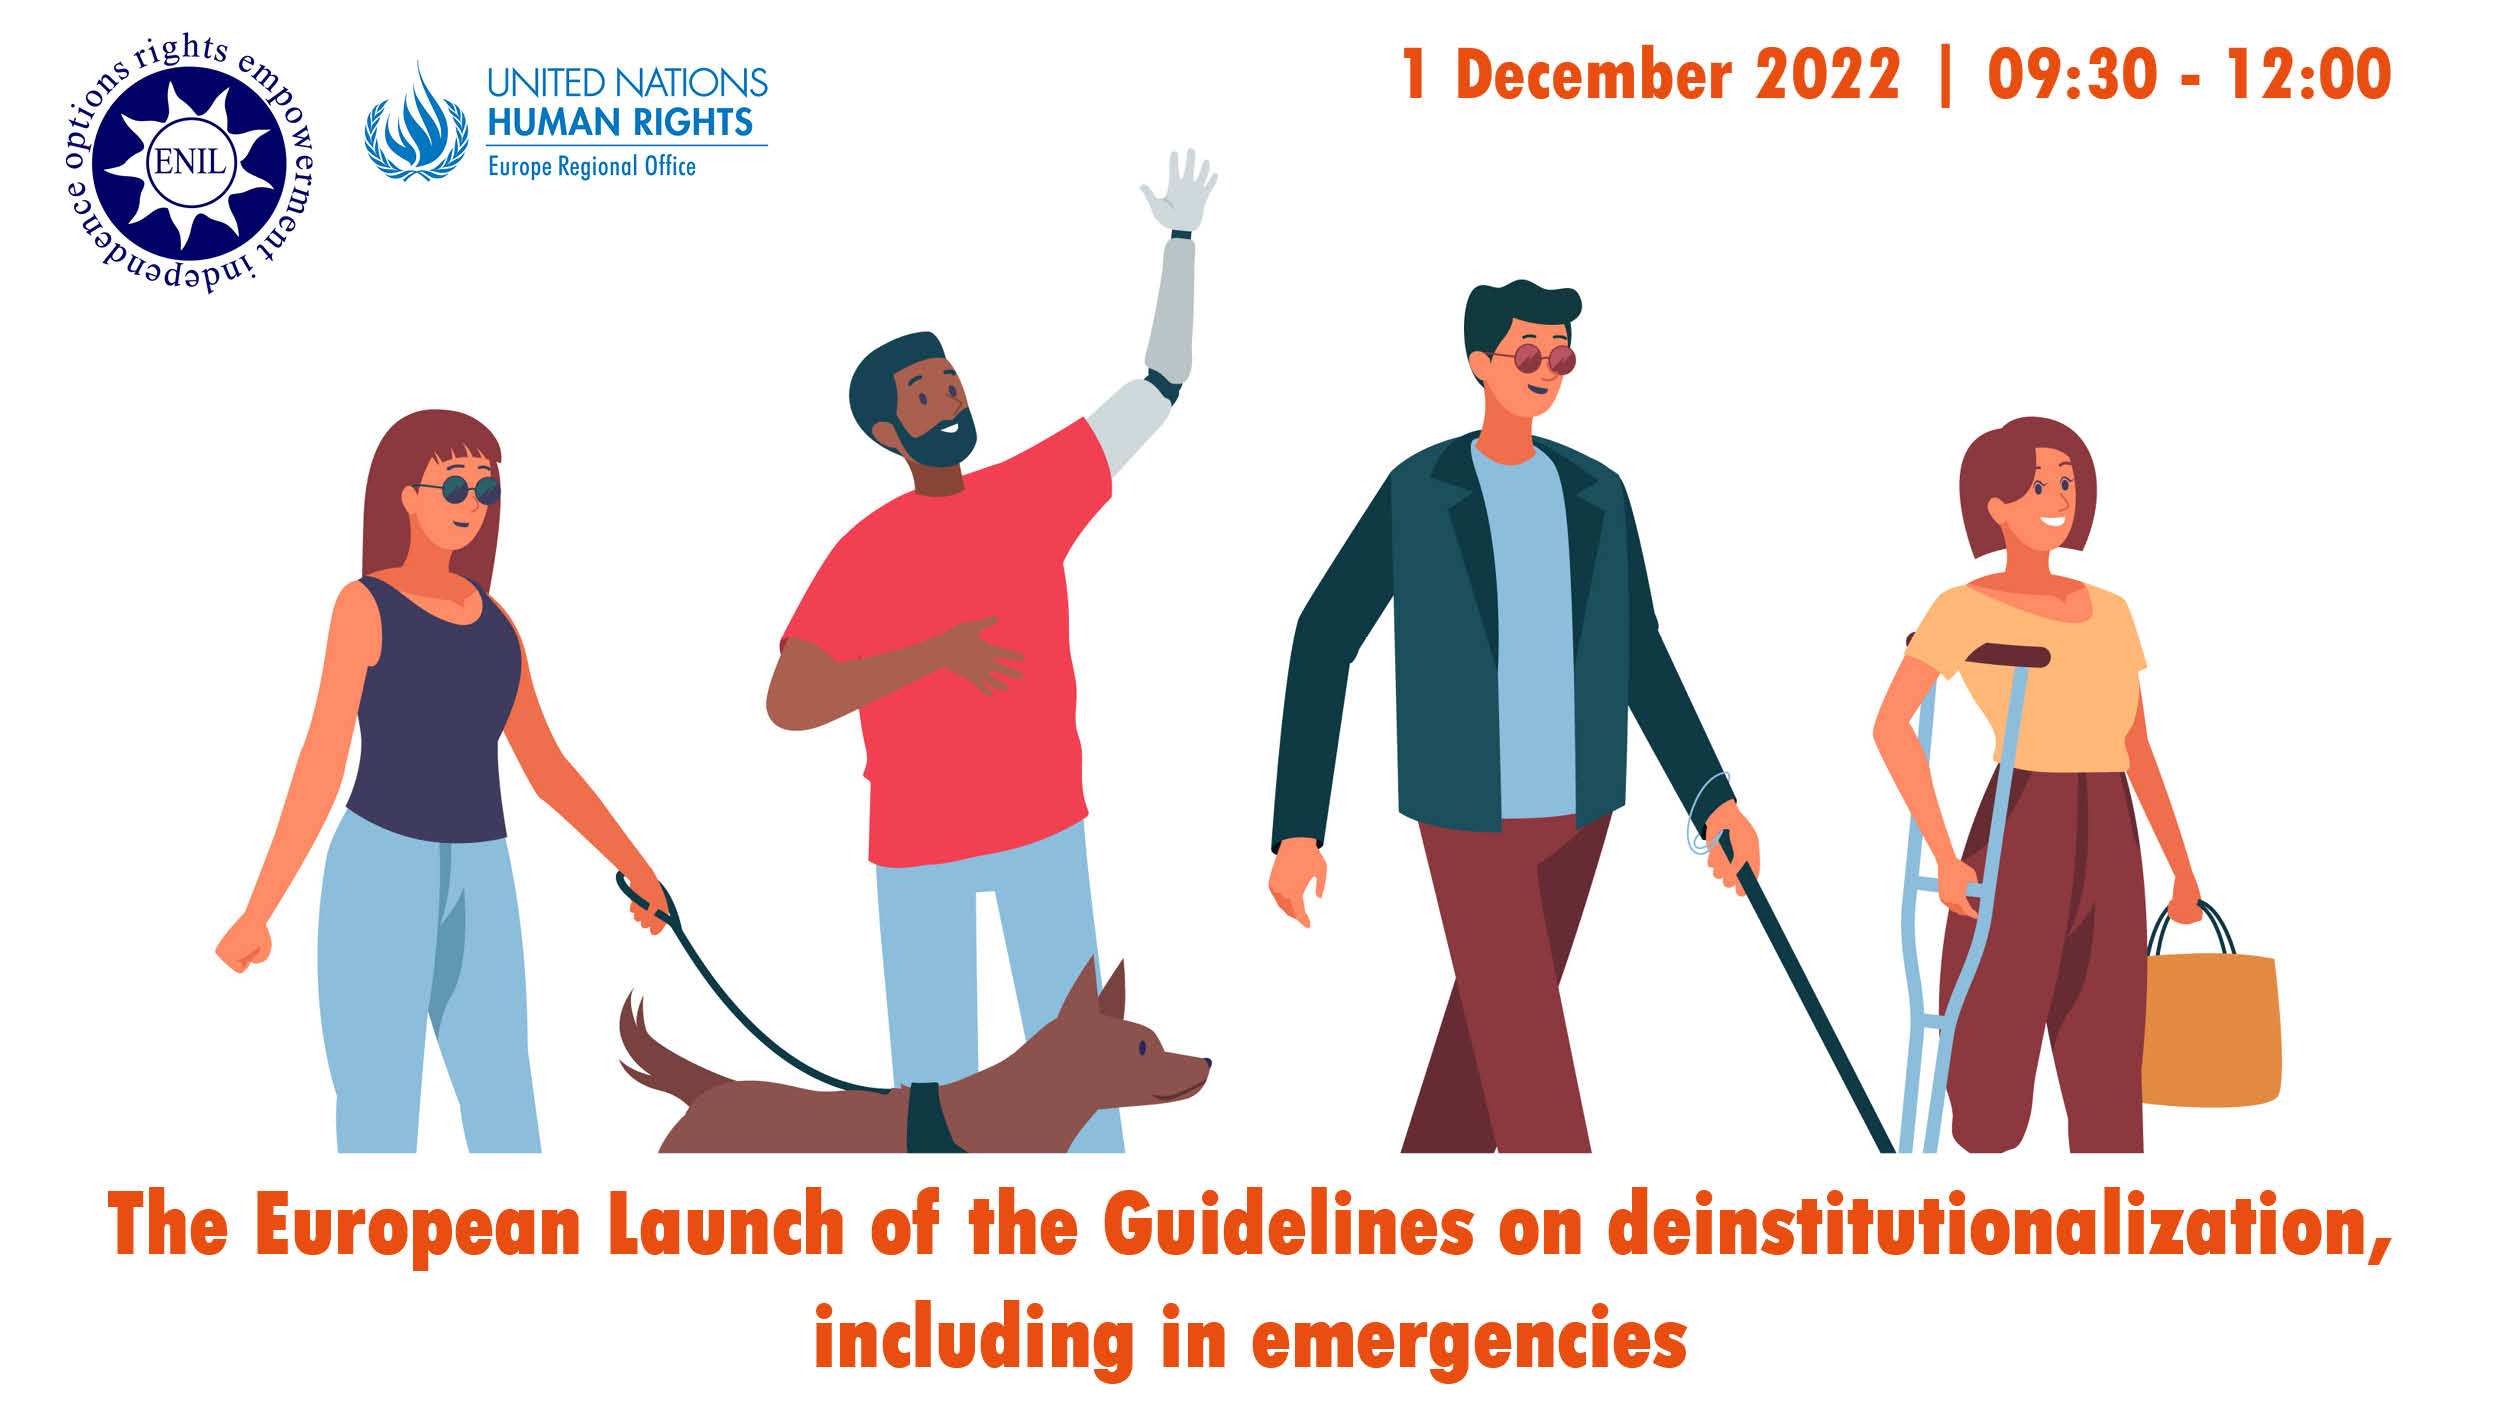 The European Launch of the Guidelines on deinstitutionalisation including in emergencies. 1 December 2022, 9:30 - 12:00